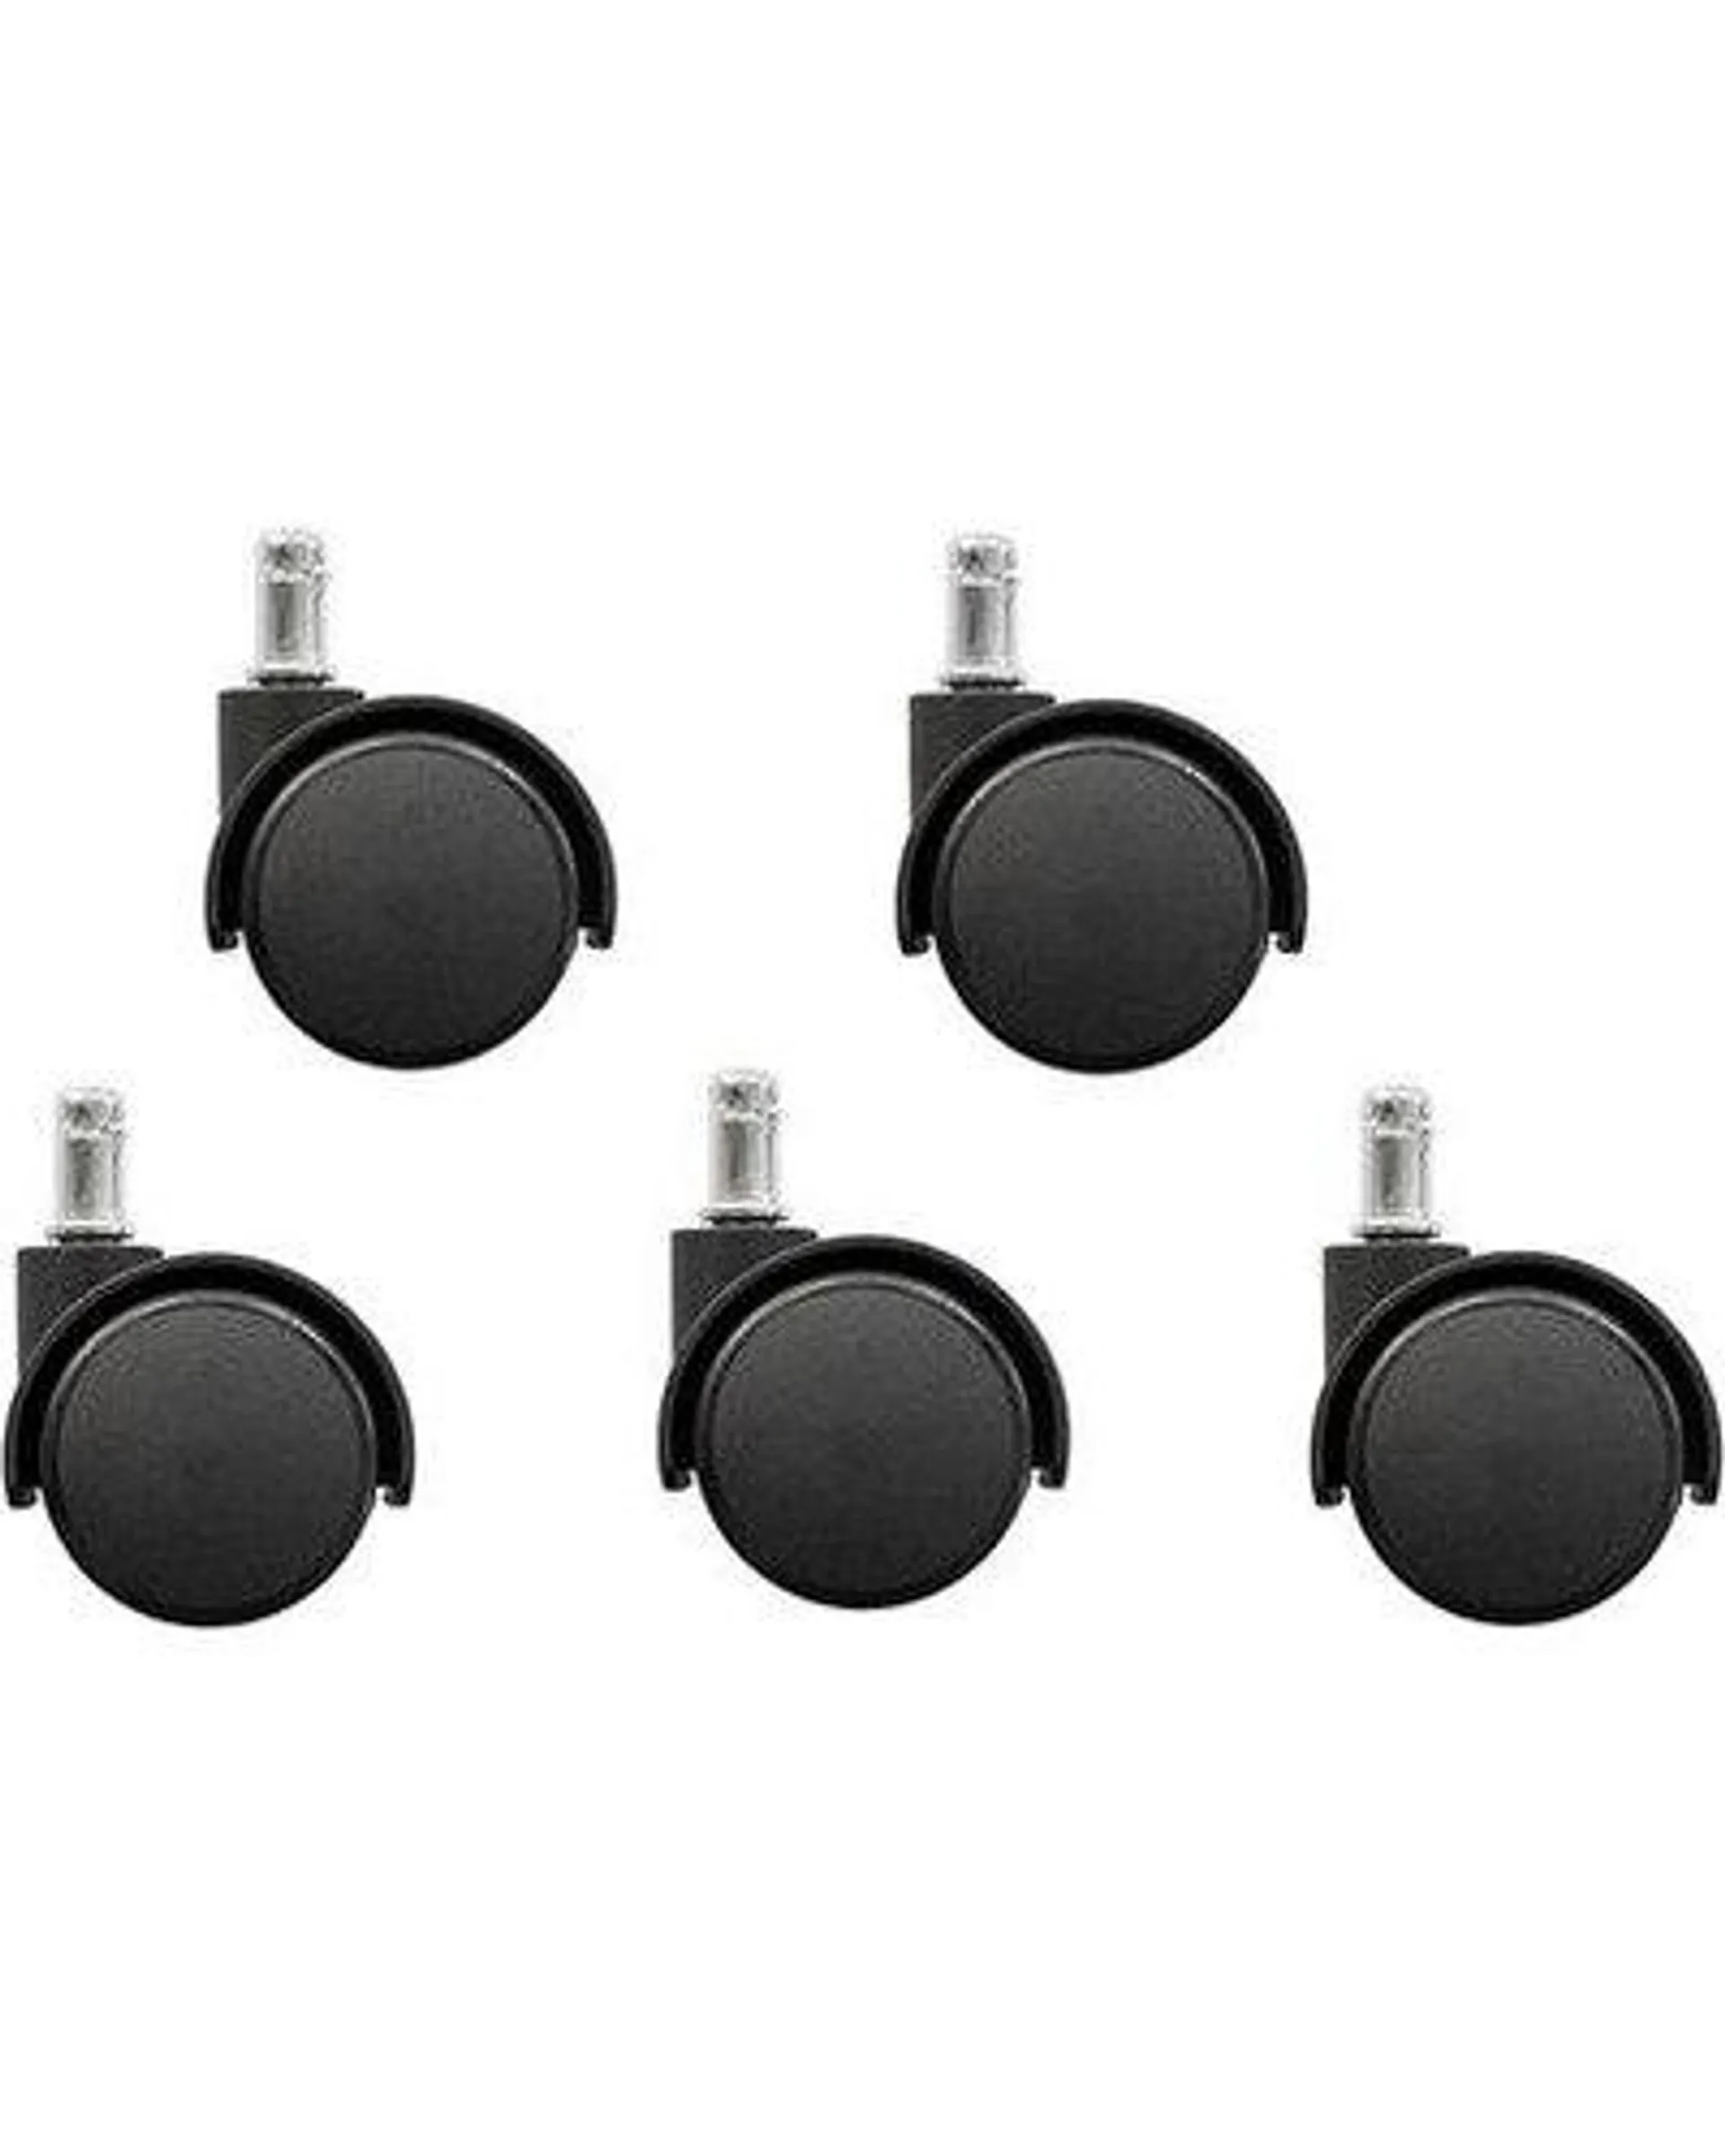 Standard Pin Office Chair Castors/Wheels with Hood (Set of 5)